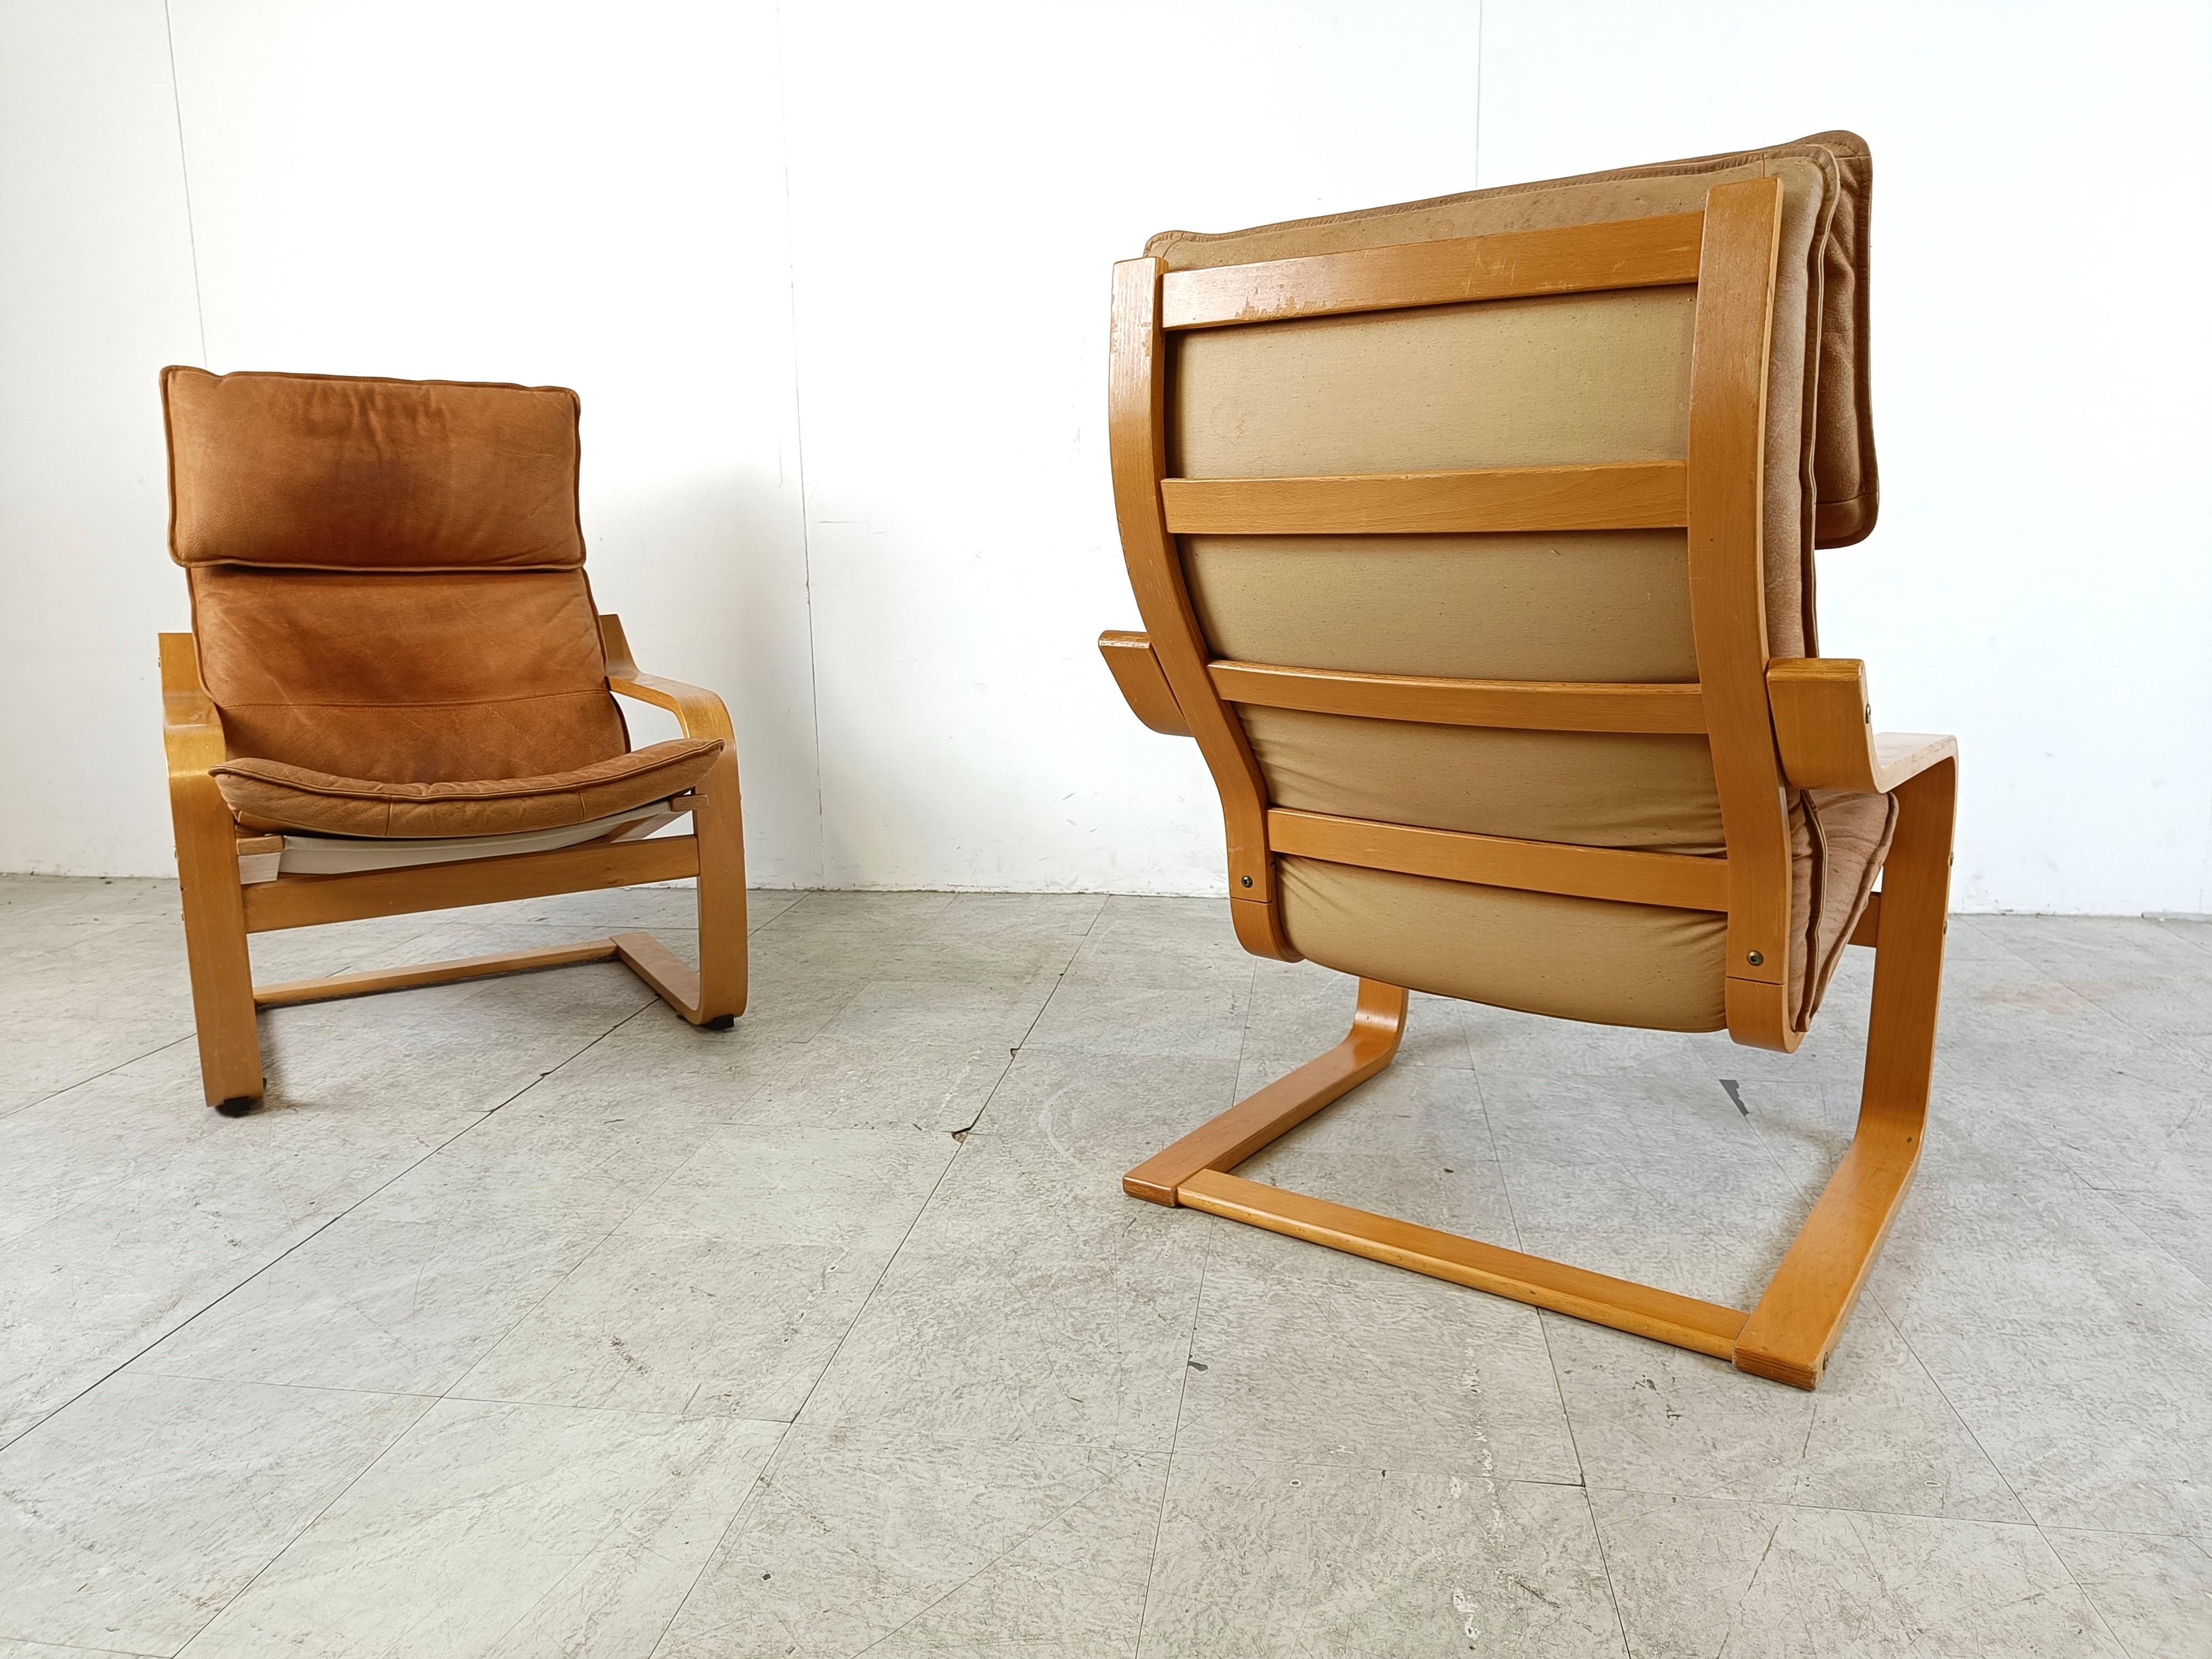 Late 20th Century Leather Poäng Chairs & Footrest by Noboru Nakamura for IKEA, 1990s